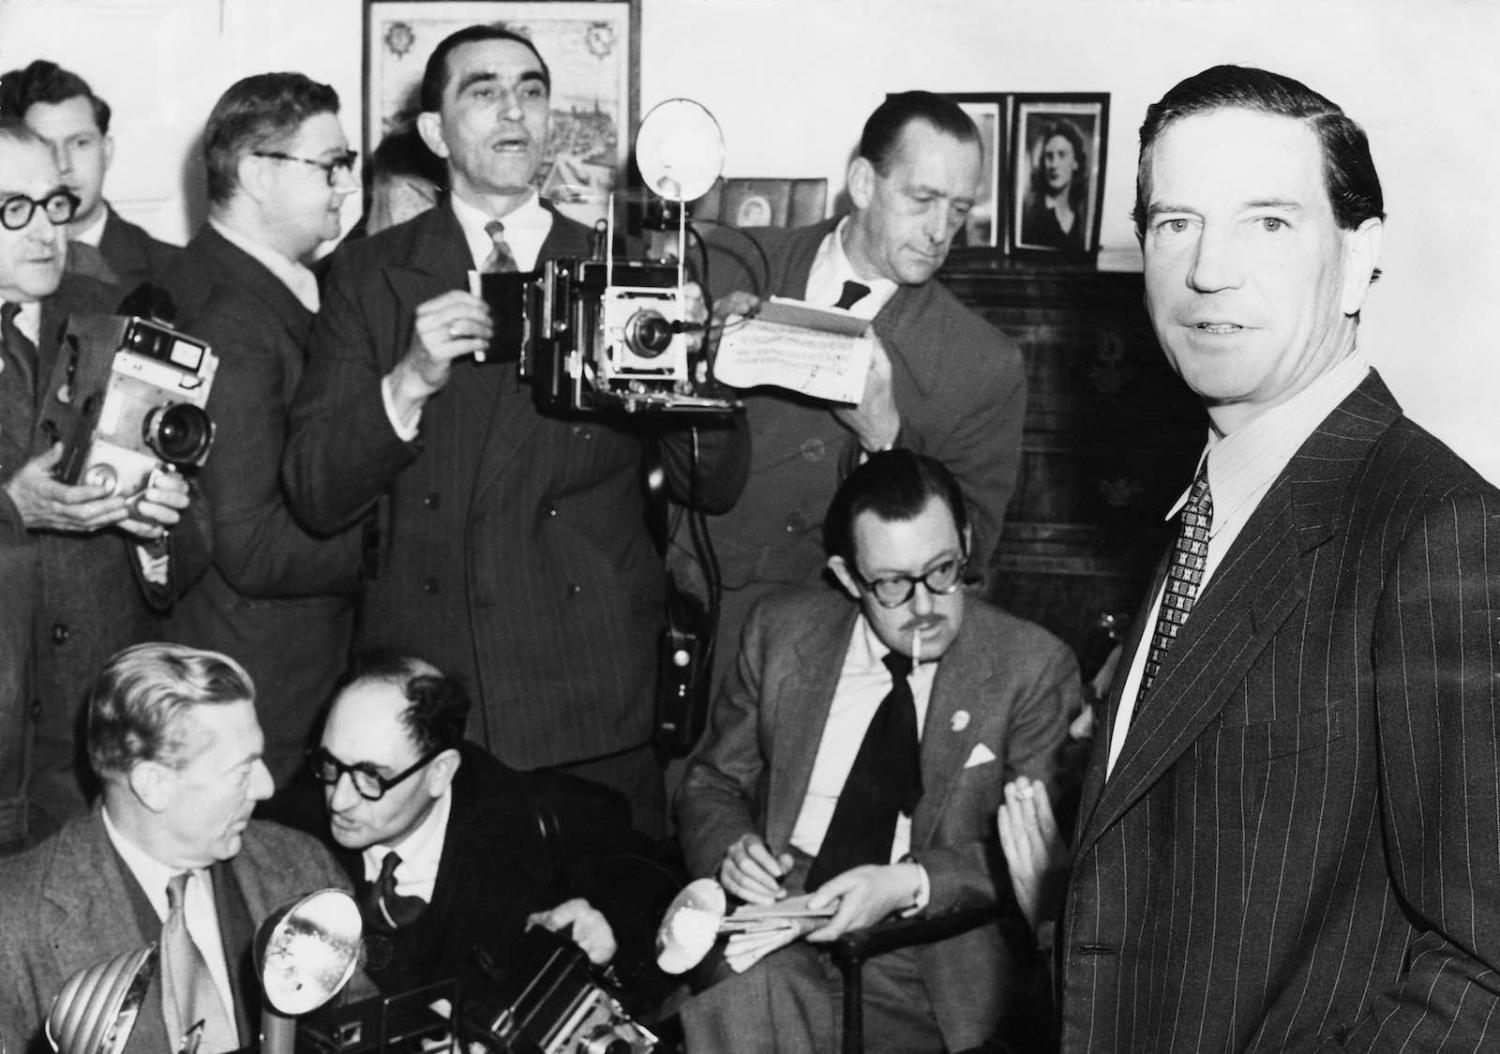 Kim Philby, later revealed as one of the Cambridge Five spy ring, holds a press conference at his mother’s home in 1955 after his name had been mentioned in connection with the the Burgess and Maclean affair (Photo: Hulton Archive/Getty)